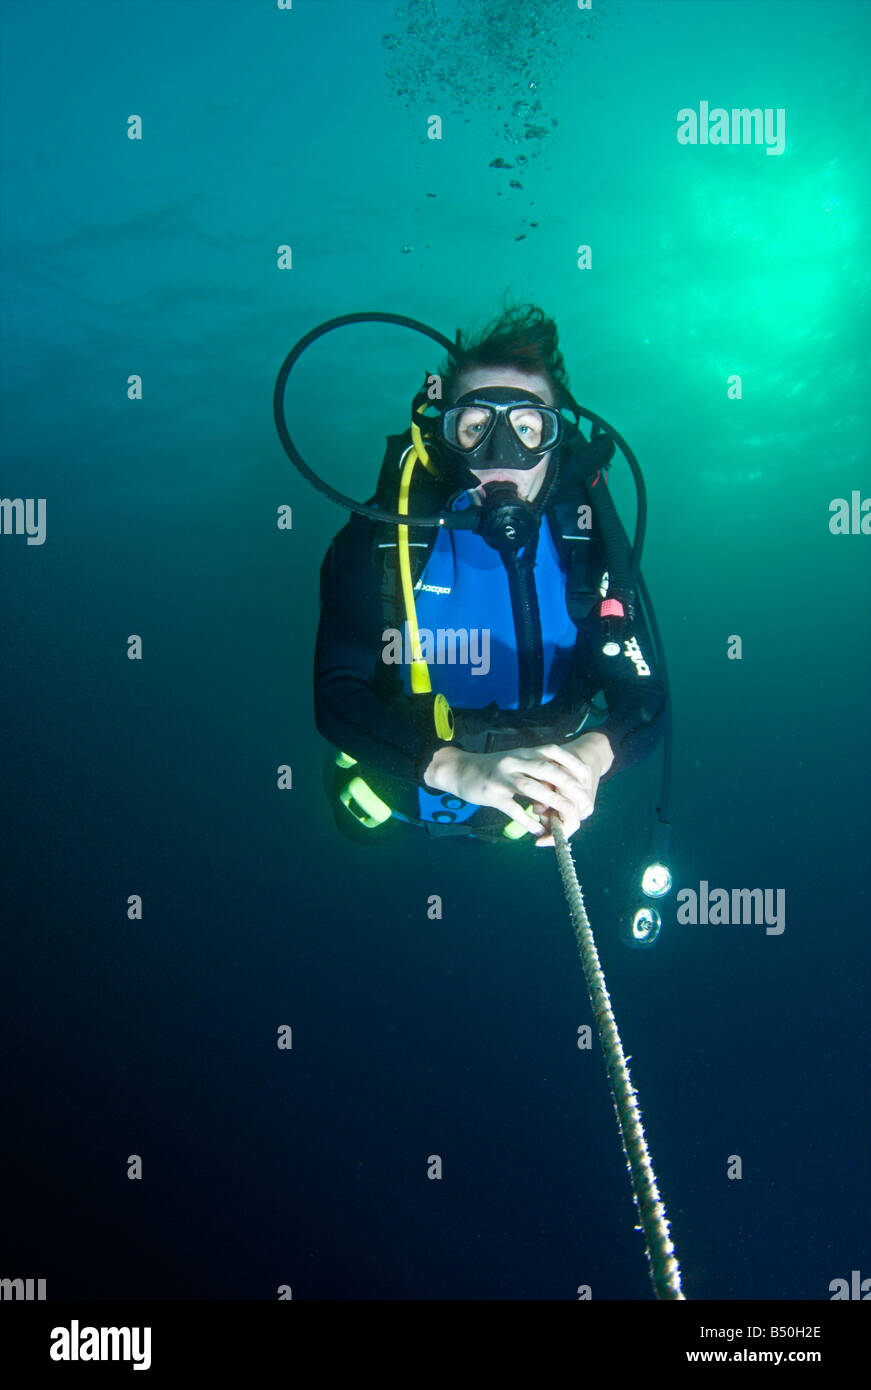 Scuba diver on line underwater with sea surface above Stock Photo